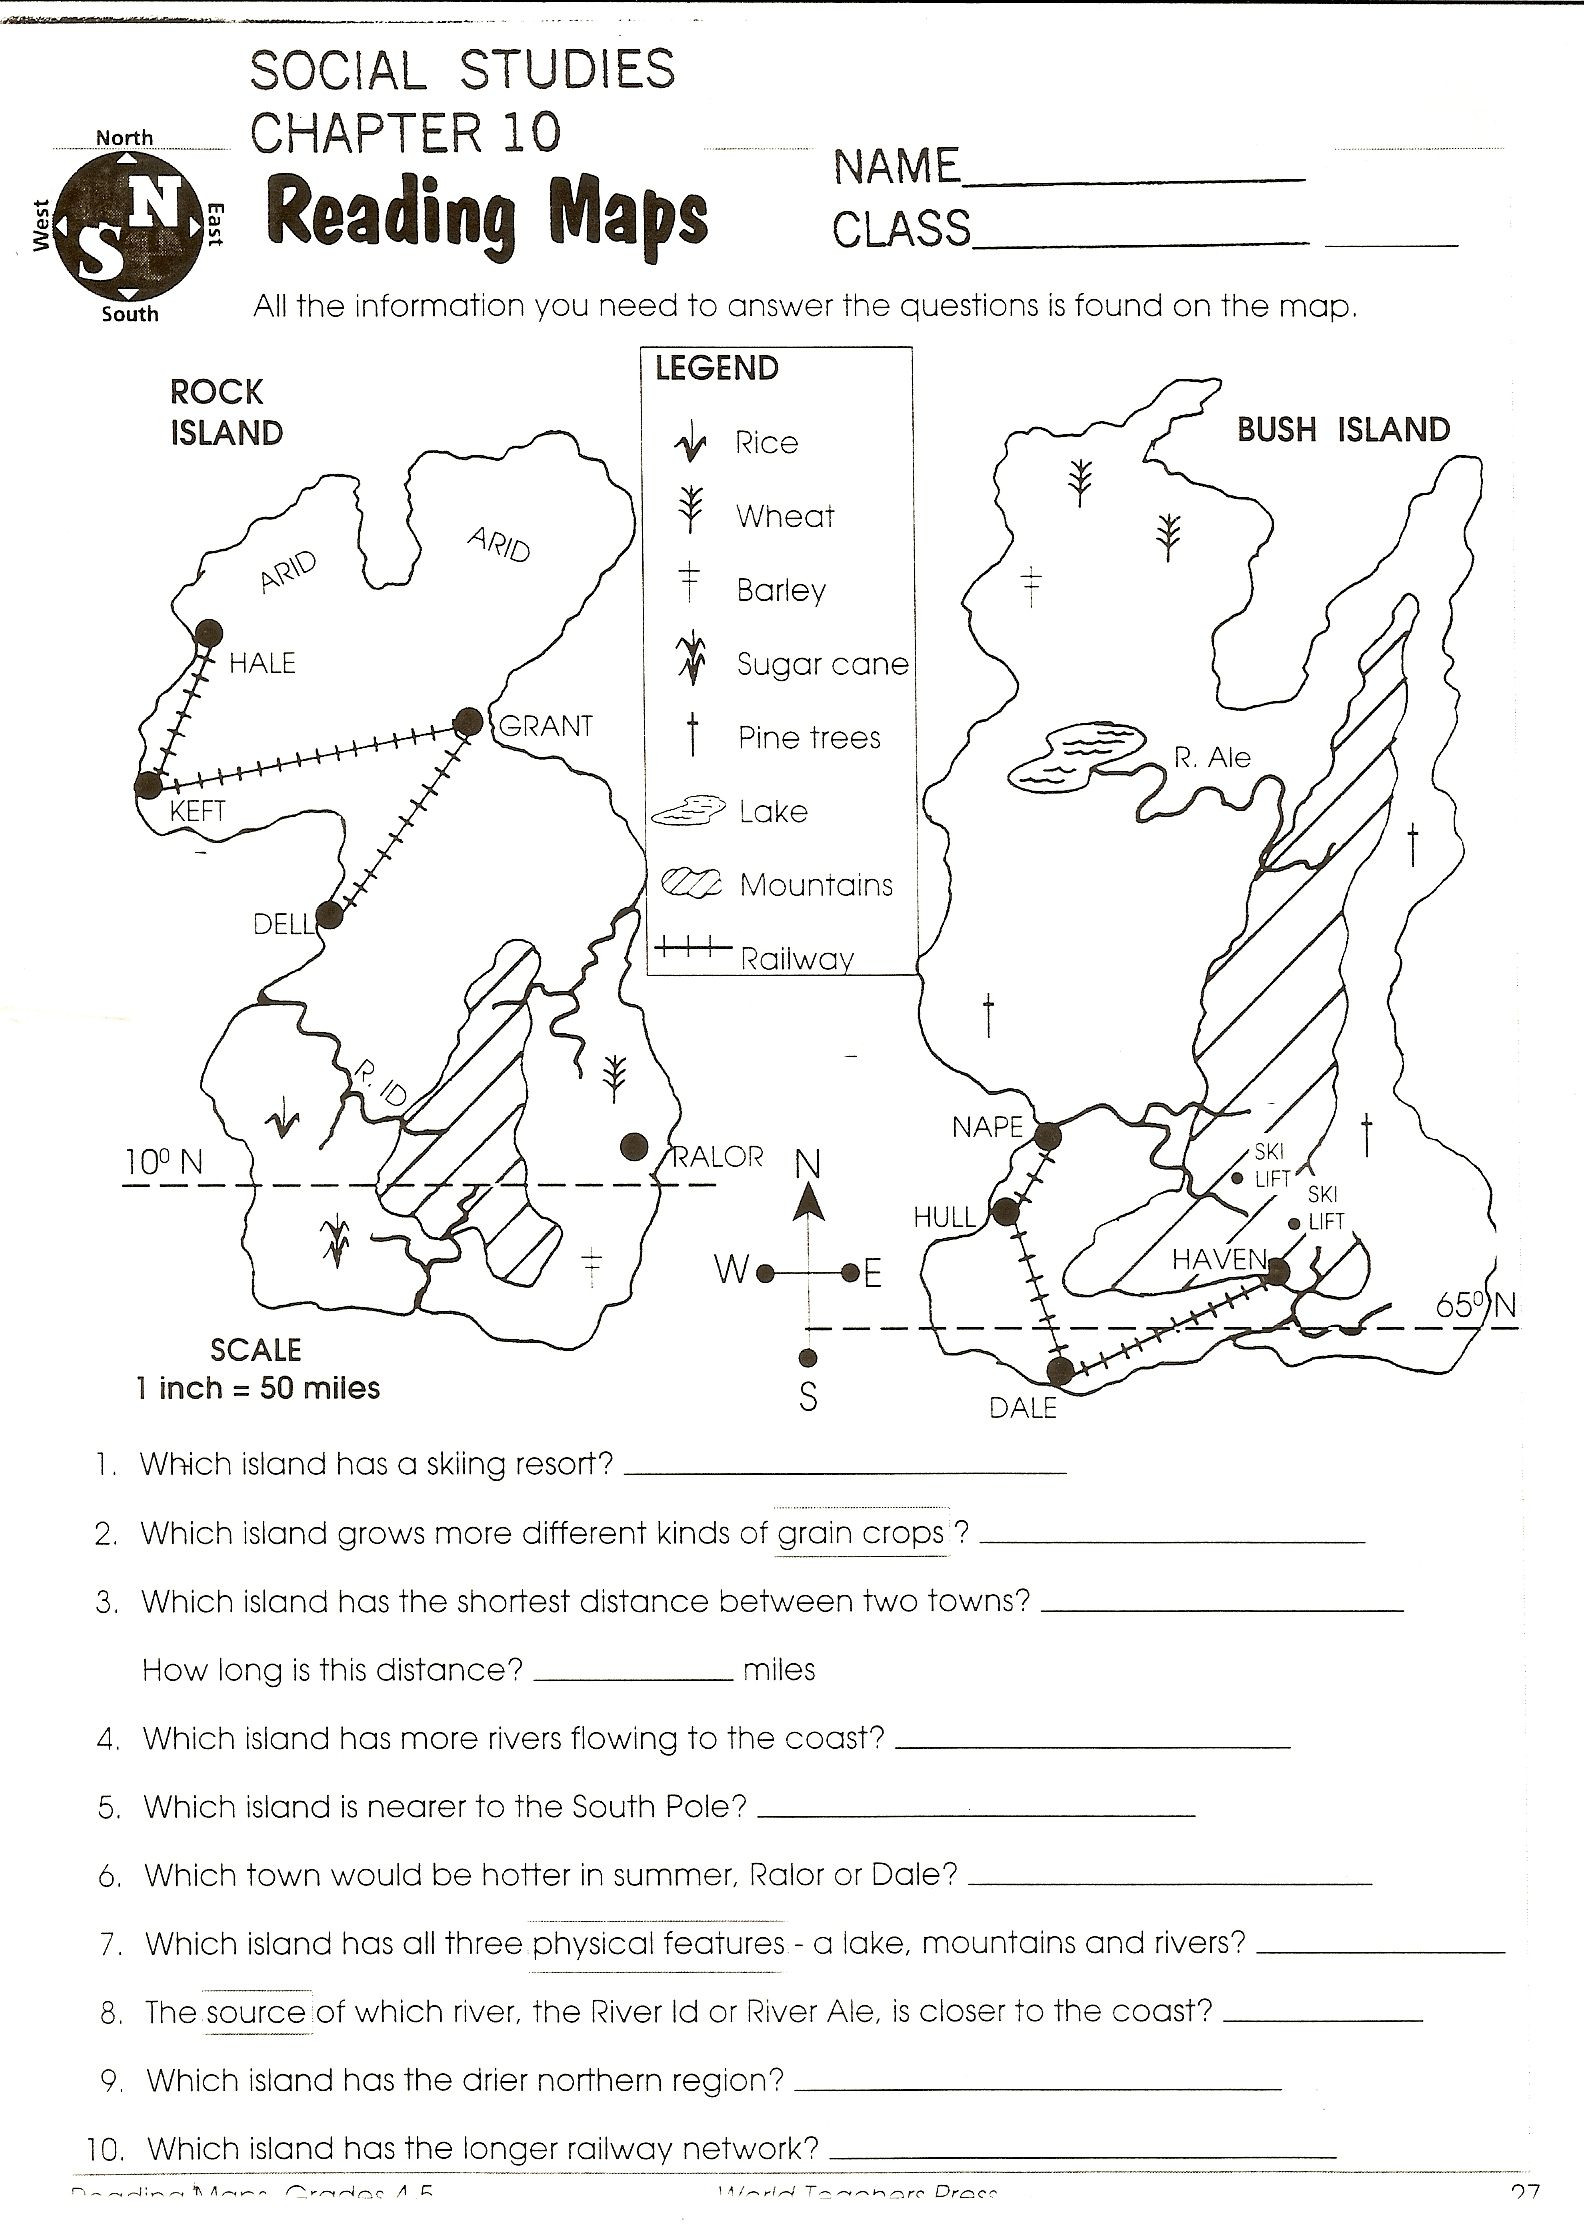 Skills Worksheet Concept Mapping social Stu S Skills with Maps Map Scale Worksheets